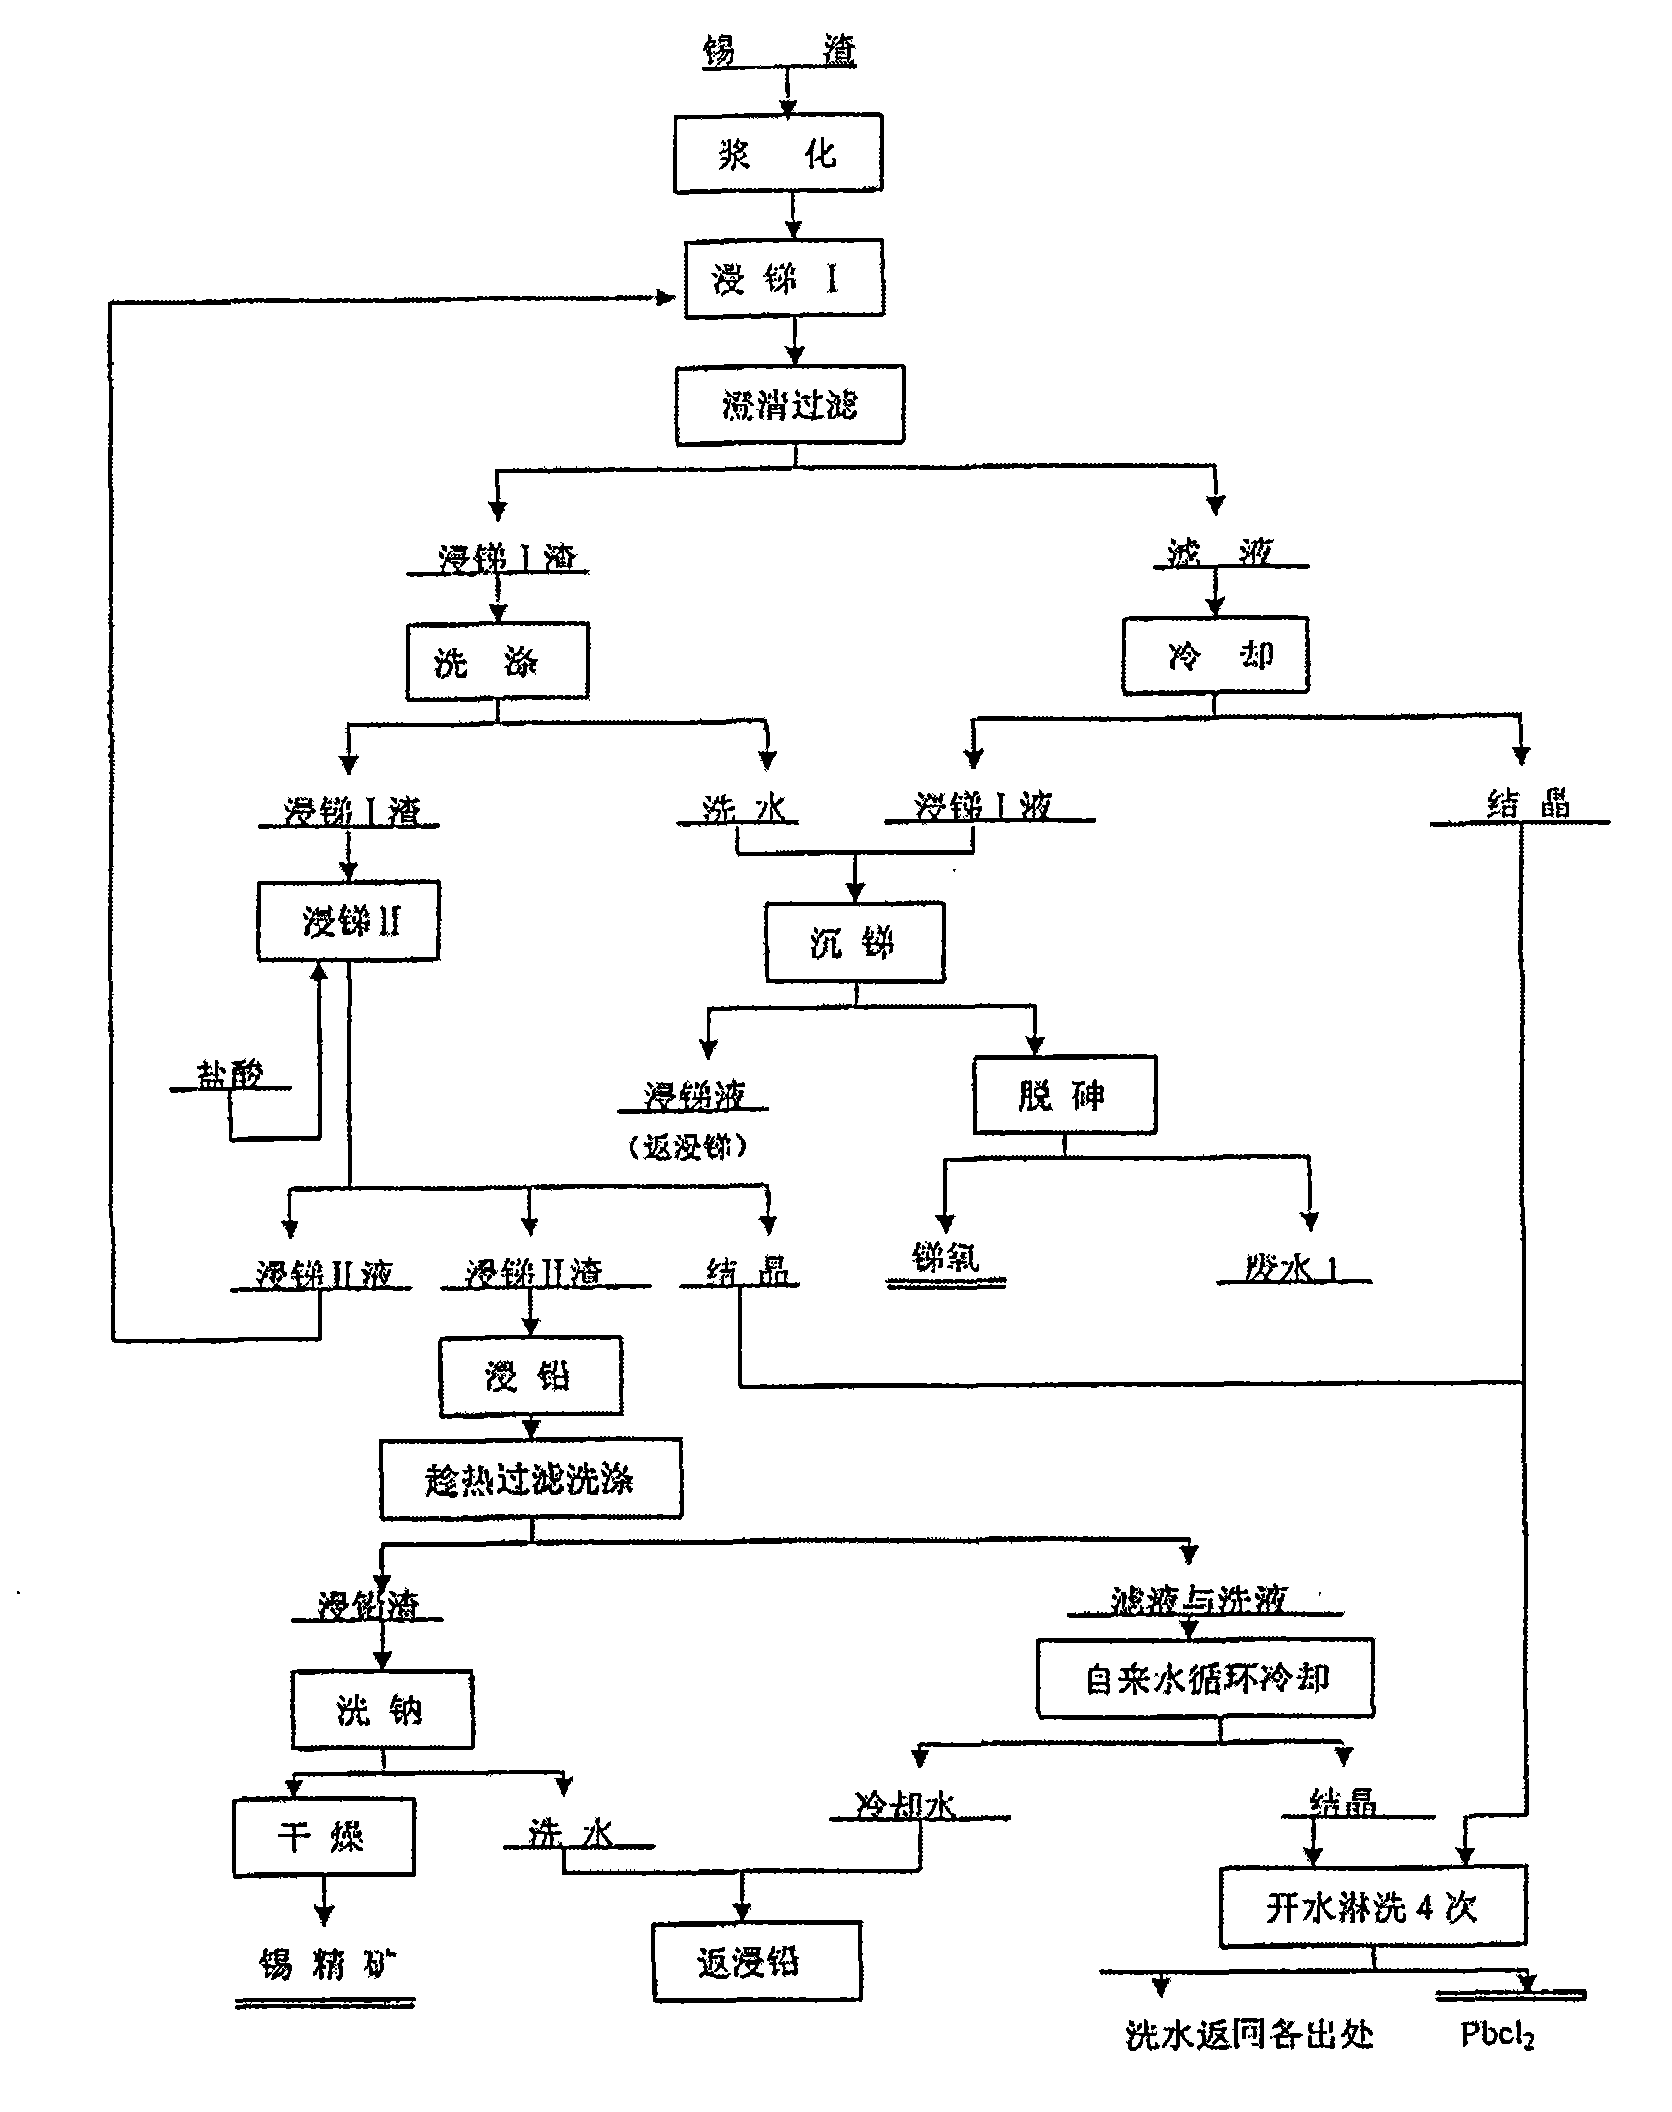 Method for recovering tin, antimony and lead and enriching indium from tin residue